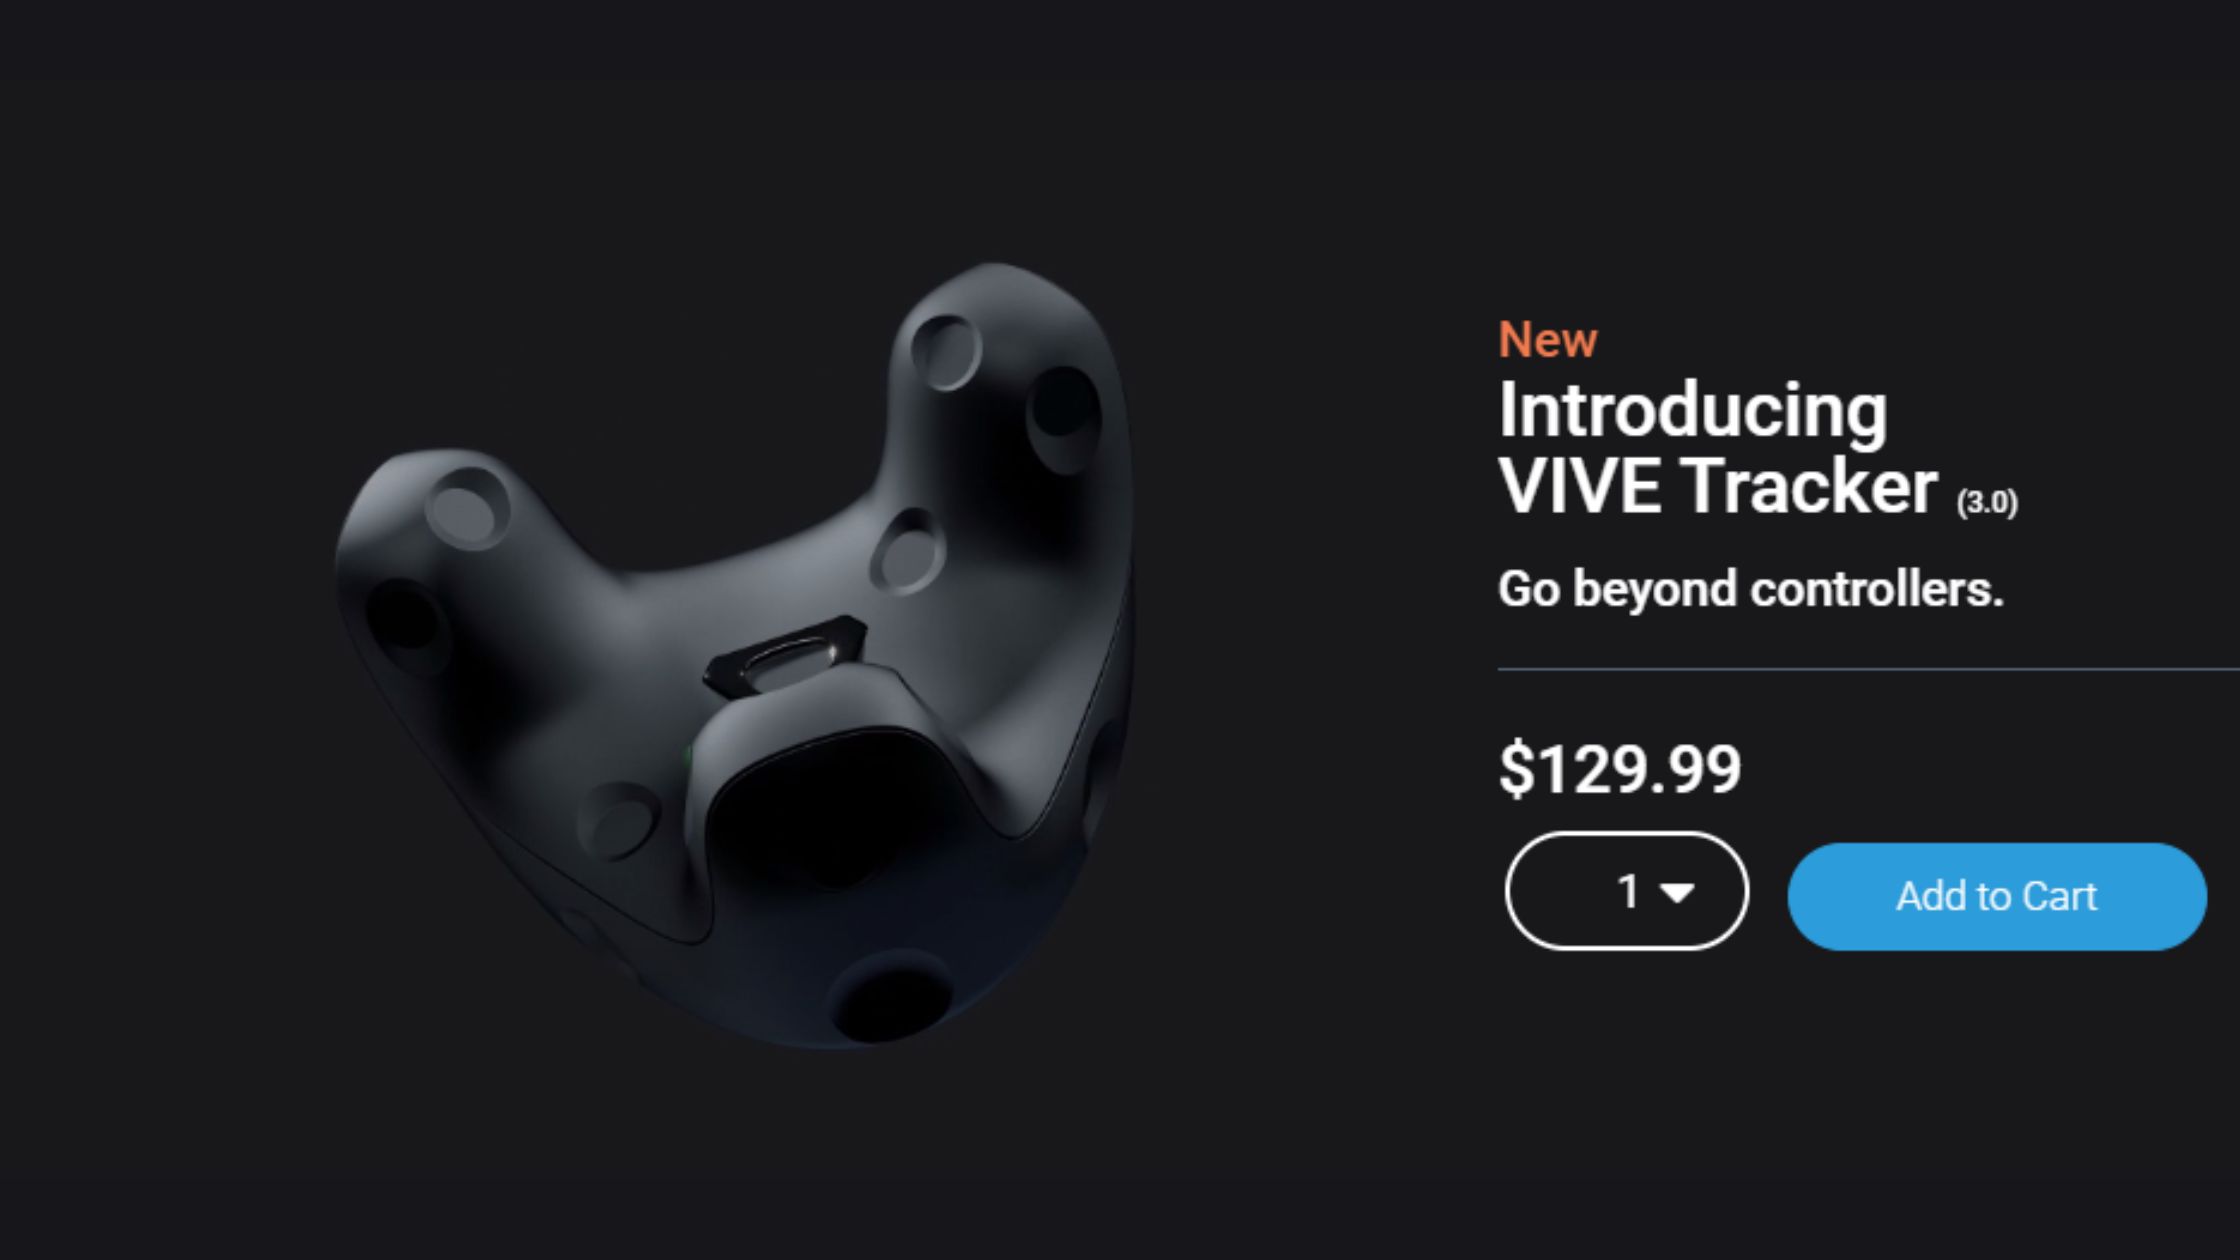 HTC VIVE tracker sells for $129.99 on the website